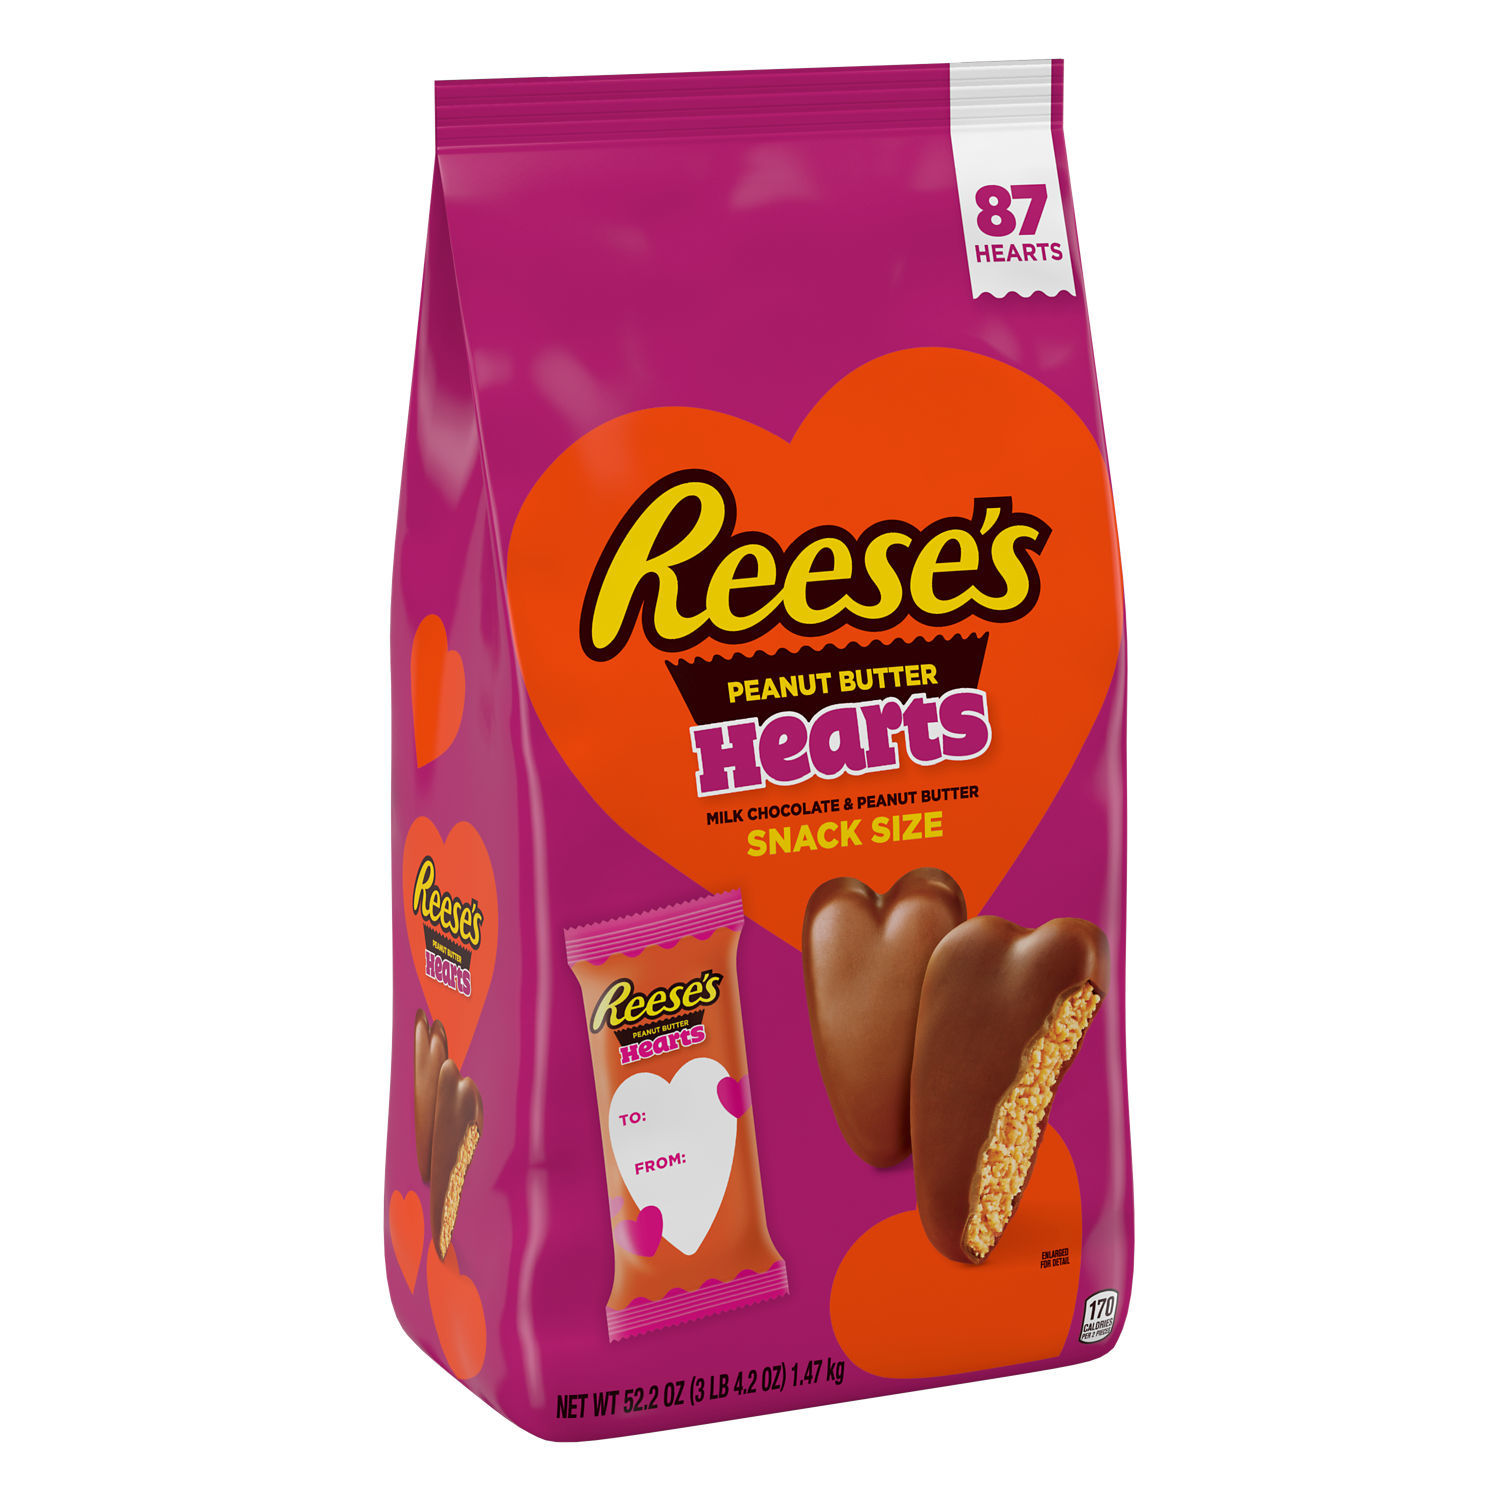 REESE'S, Milk Chocolate Peanut Butter Hearts Snack Size Candy, Valentine's Day, 52.2 oz, Bulk Bag (87 Pieces) - image 1 of 6